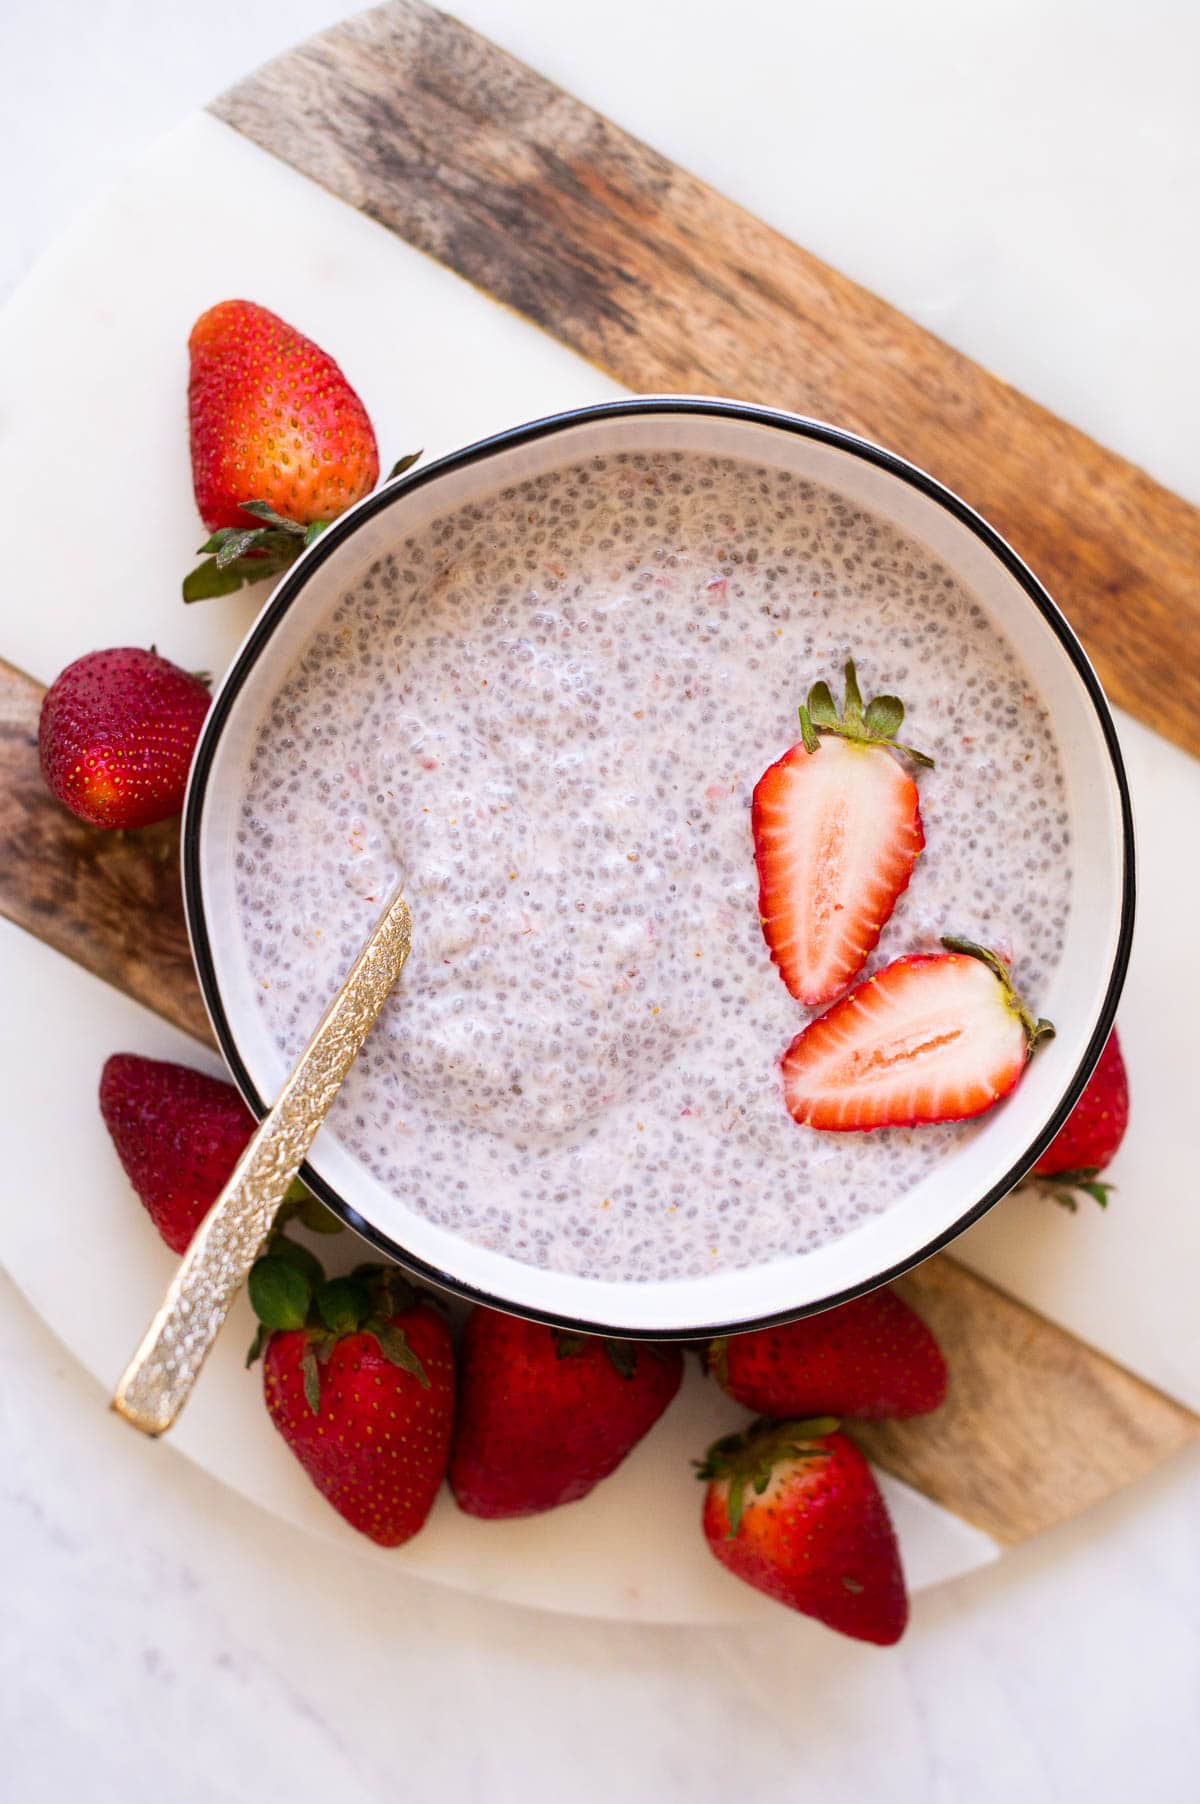 Chia seed pudding with strawberries served in a bowl with a spoon.